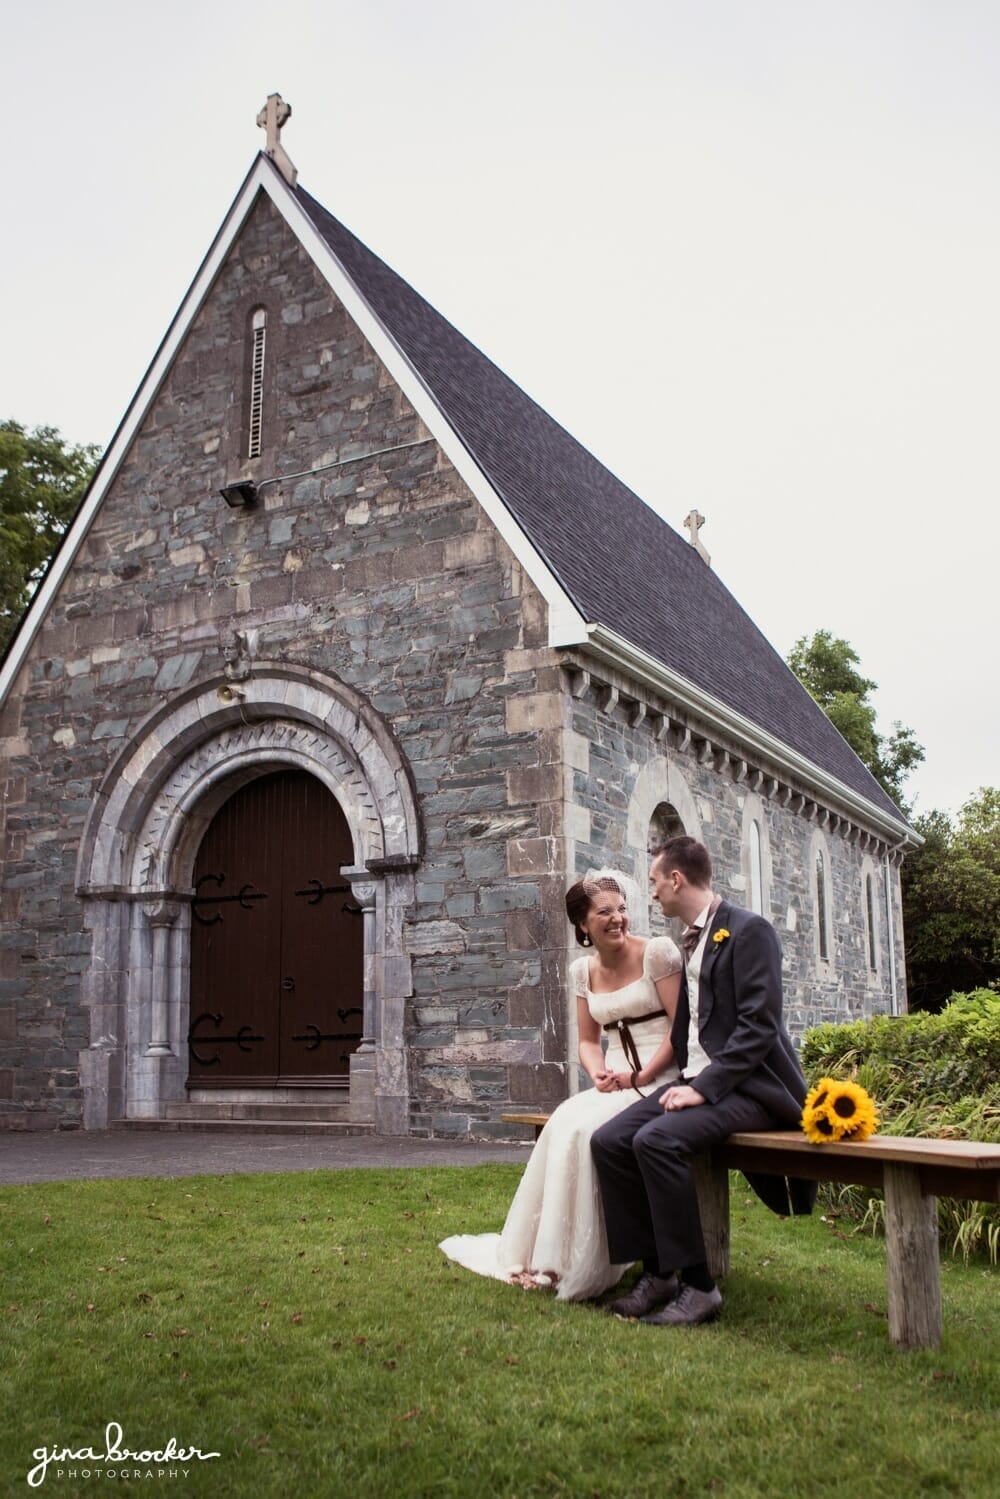 Sweet Bride and Groom Portraits Outside Church